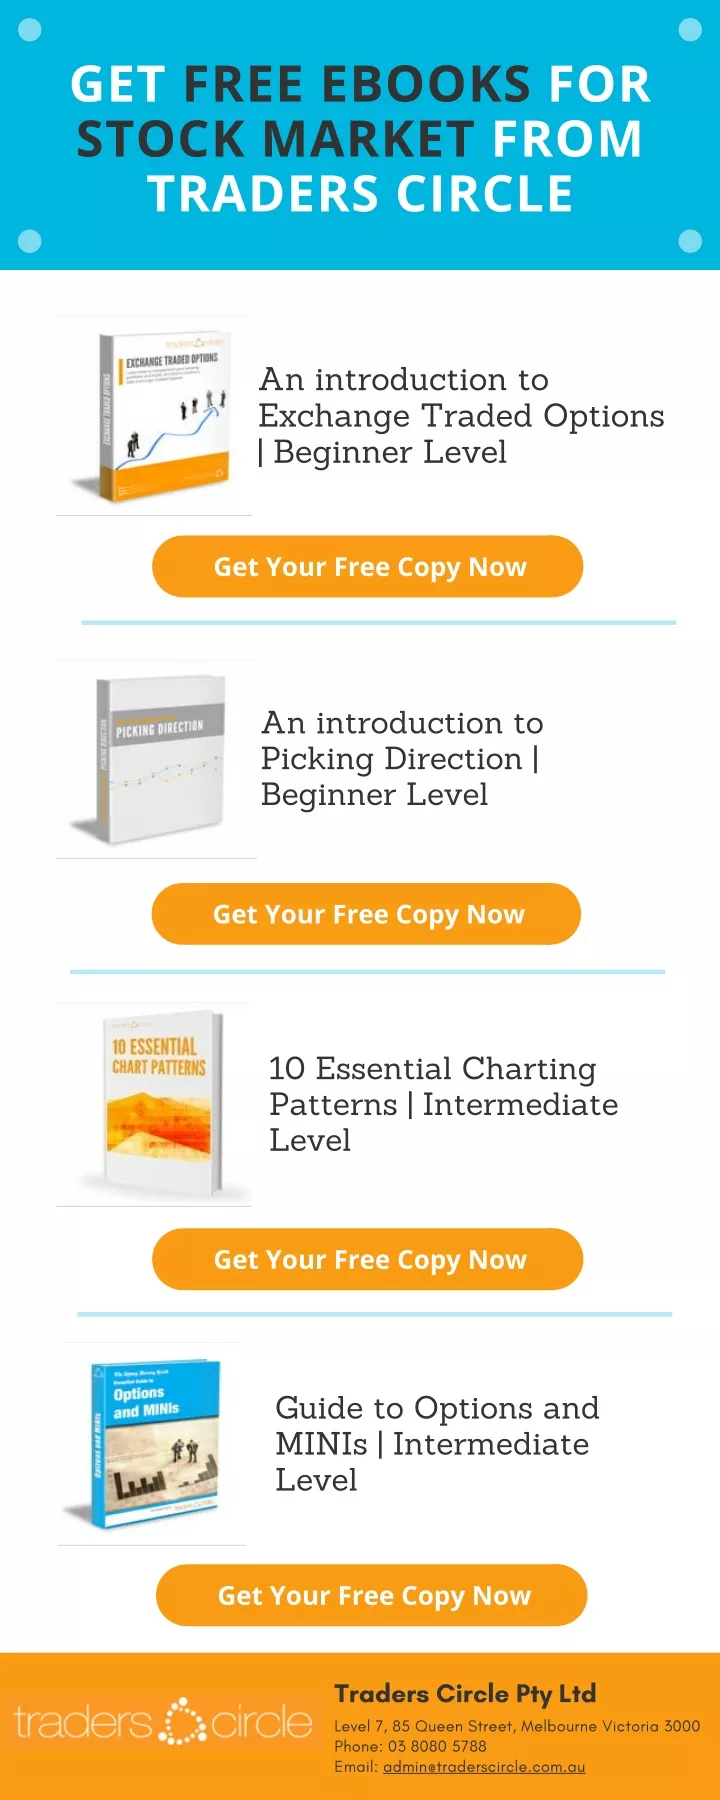 get free ebooks for stock market from traders